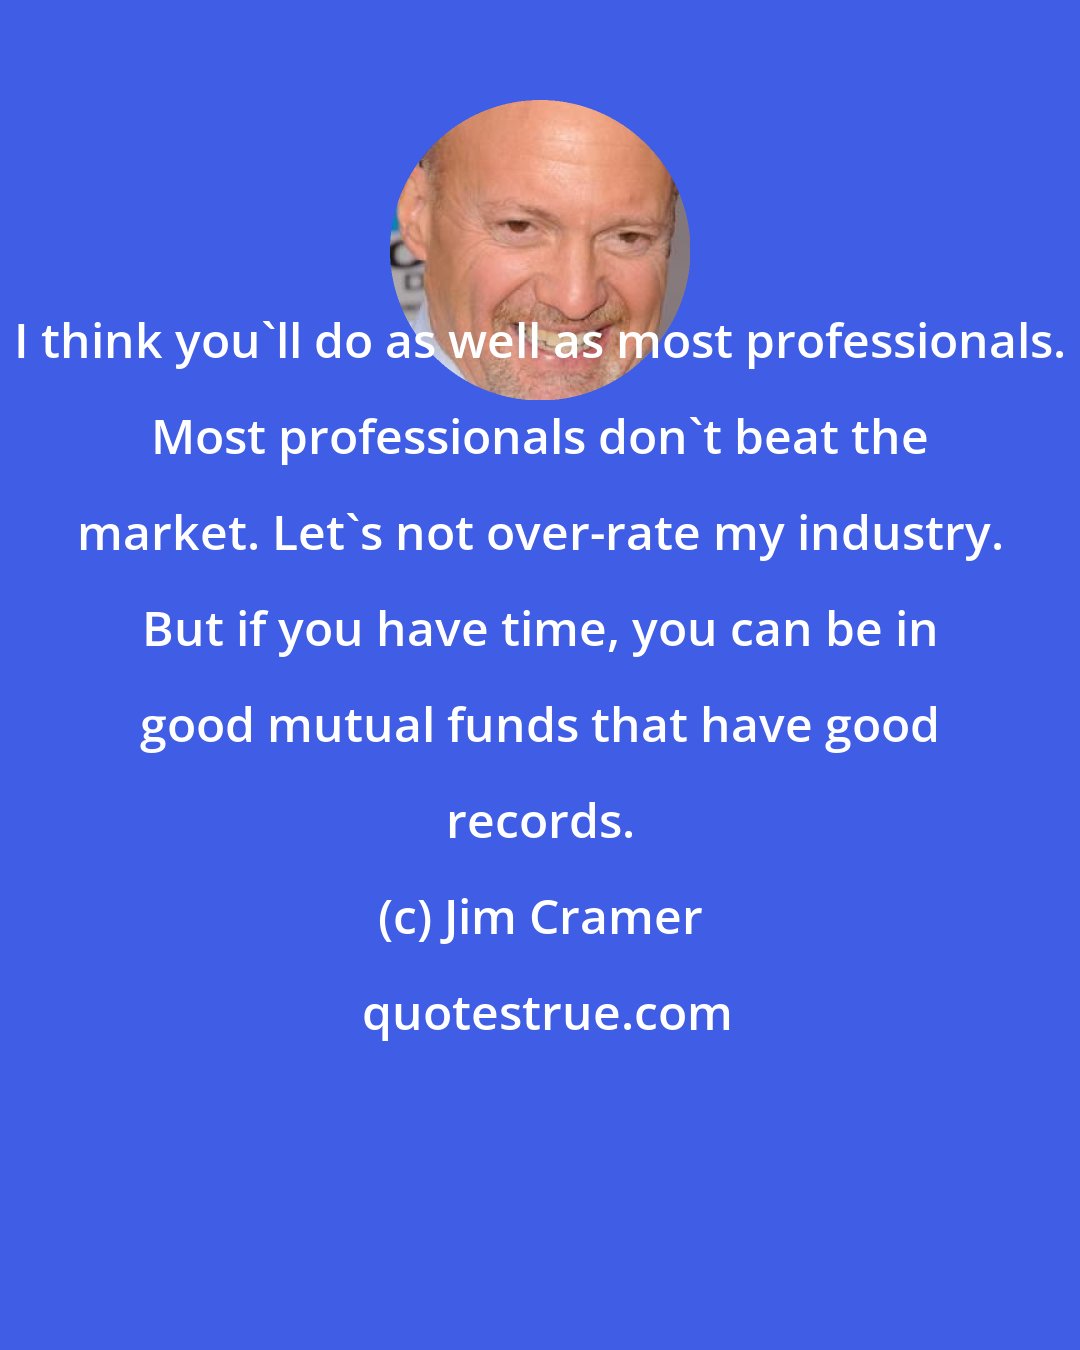 Jim Cramer: I think you'll do as well as most professionals. Most professionals don't beat the market. Let's not over-rate my industry. But if you have time, you can be in good mutual funds that have good records.